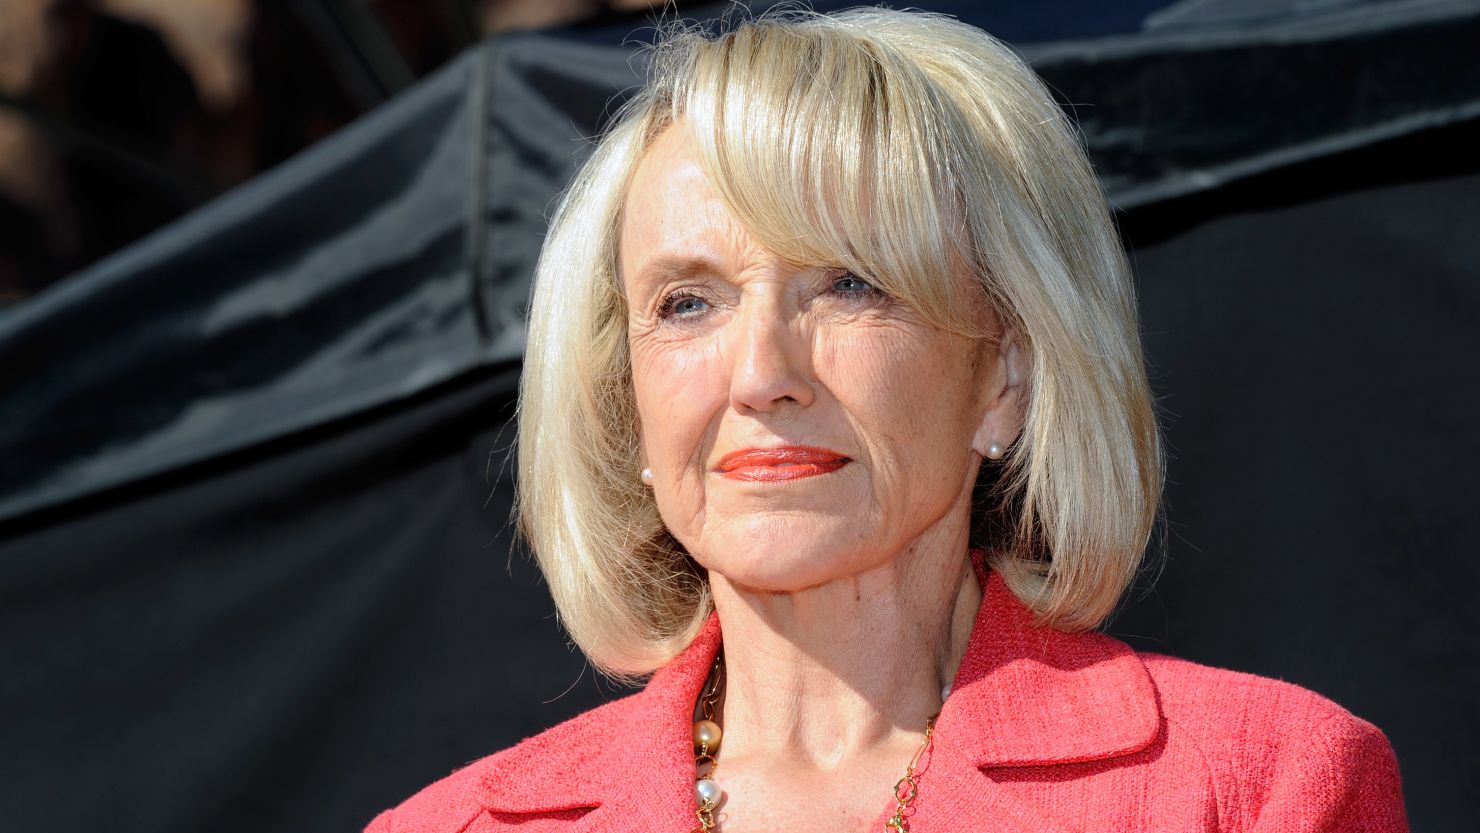 Gov. Jan Brewer said she stands "with the majority of Americans" who she says oppose taxpayer-funded abortions.